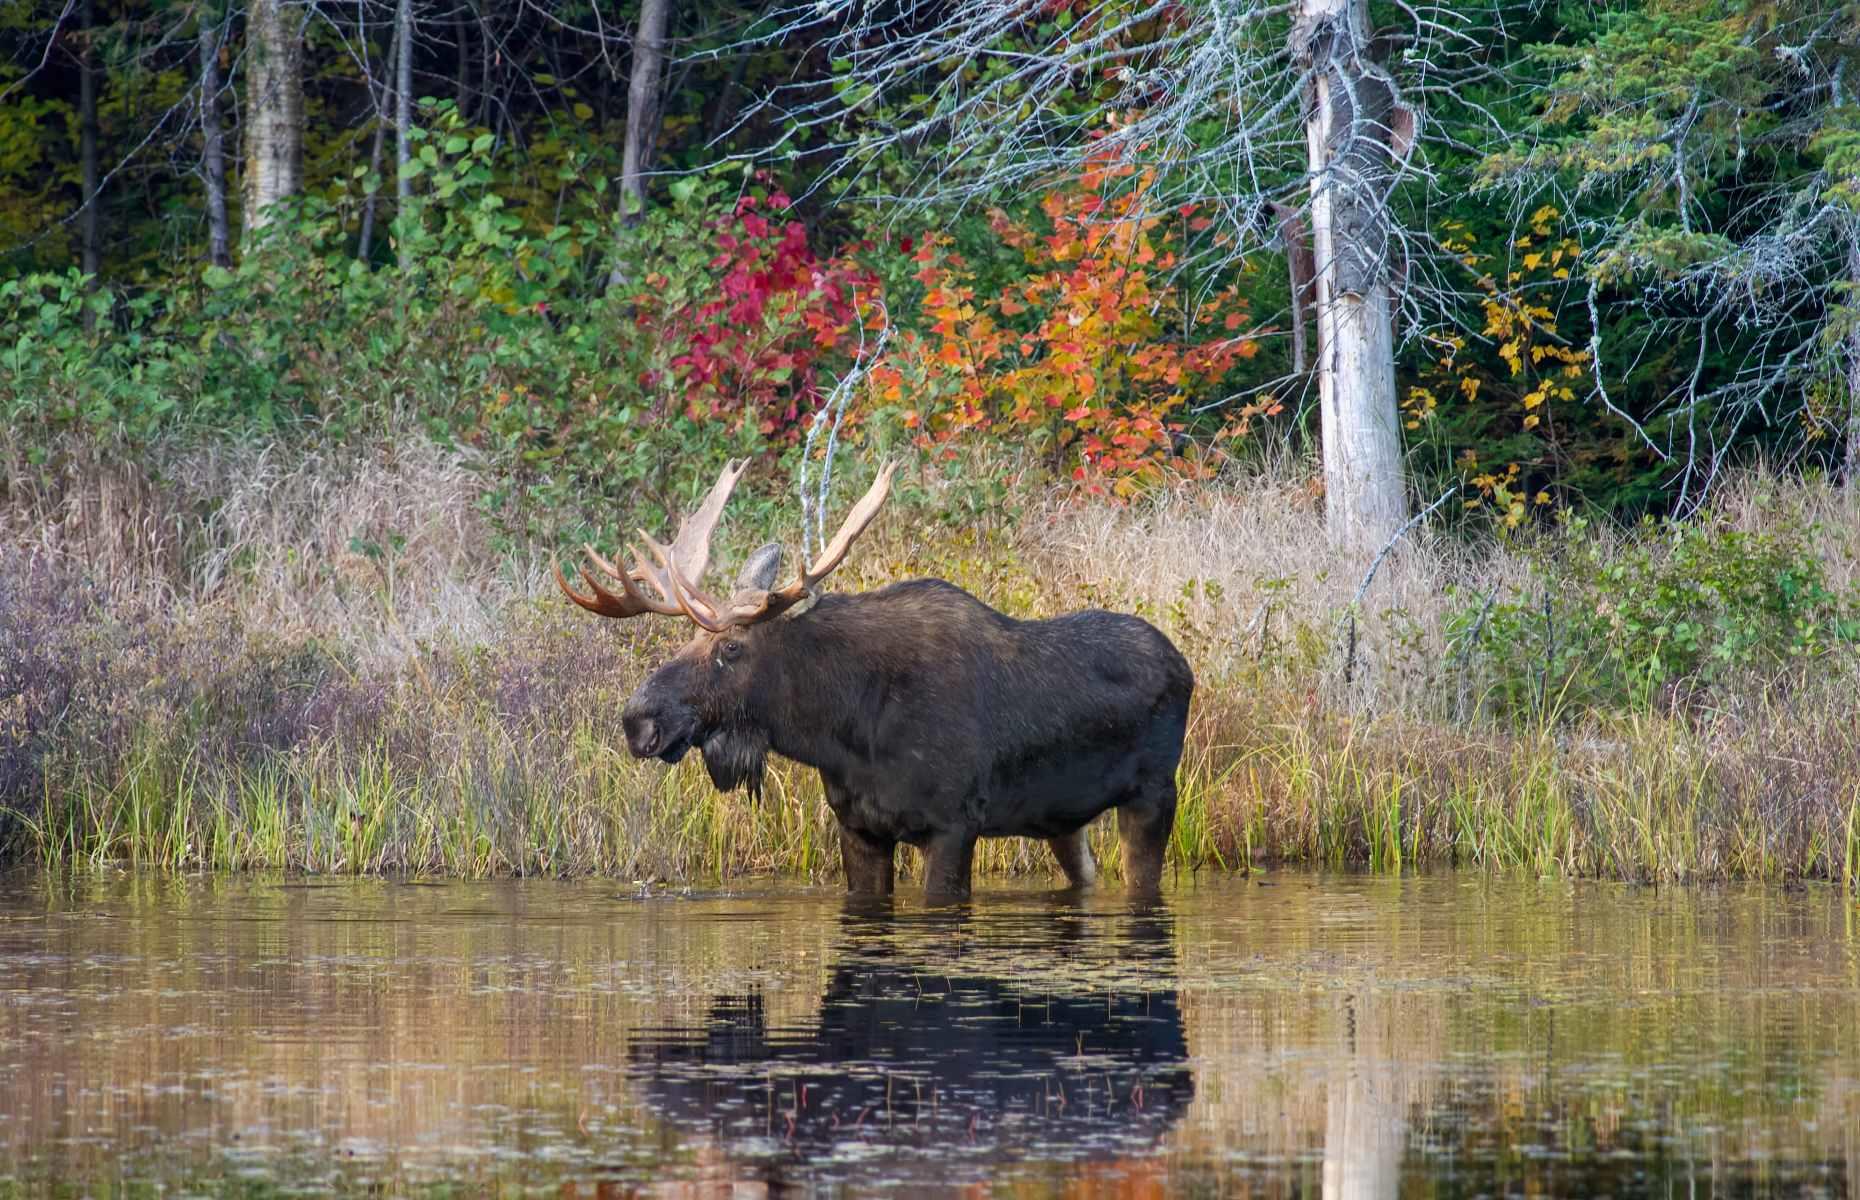 <p>Is there an animal more synonymous with Canada than the moose? They live in almost every region of the country, except for Vancouver Island and the Arctic beyond, but the place where it’s easiest to find them in the wild is Ontario’s Algonquin Provincial Park. This protected area, dappled with maple trees, vast lakes and dramatic canyons, has a moose population of between 2,500 and 4,500, best observed during the spring when they feed on fresh foliage.</p>